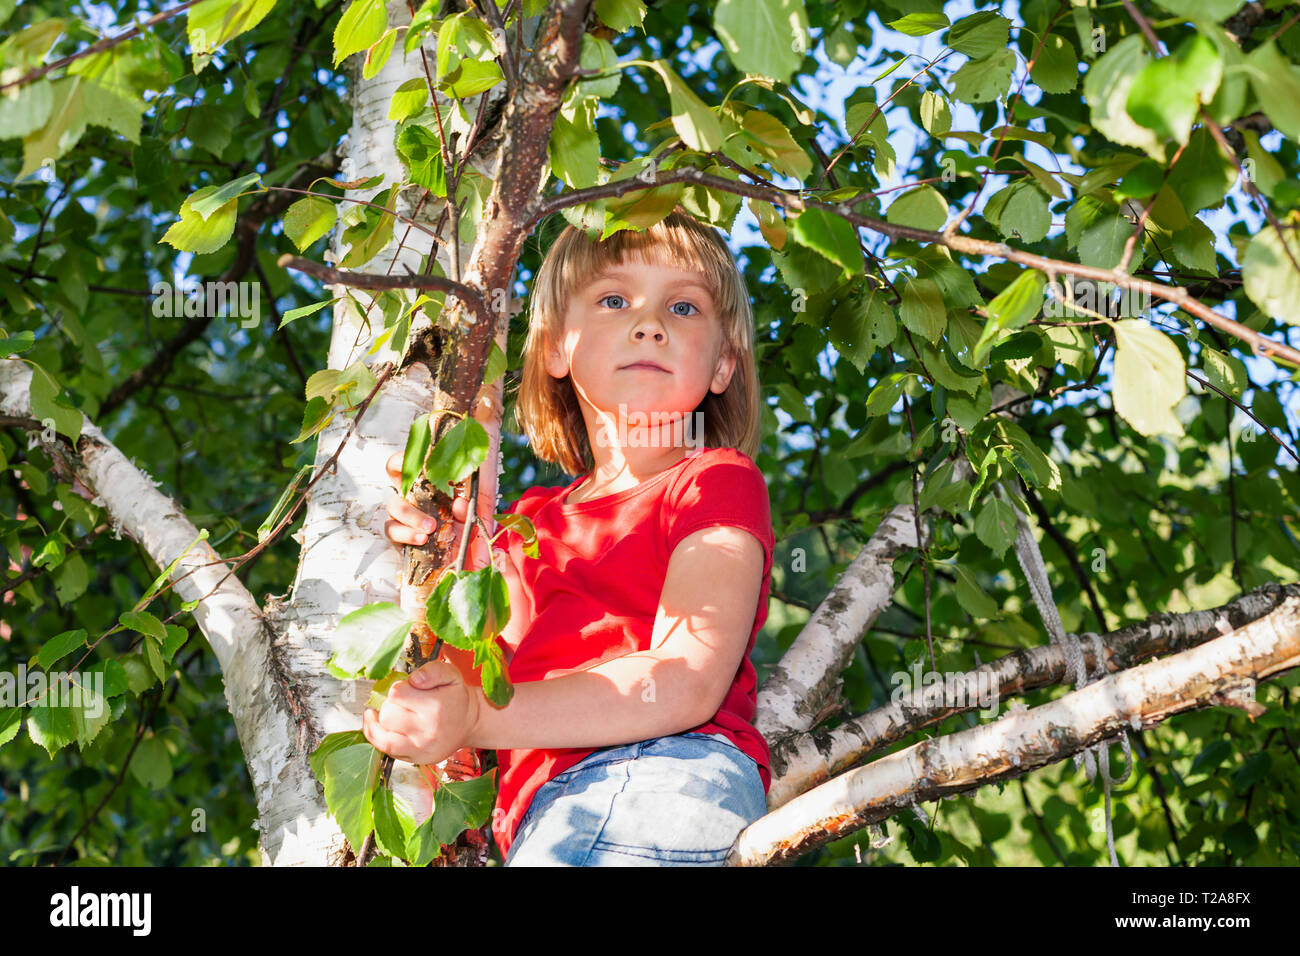 Elementary age girl climbing a tree branch while playing in a summer garden - child safety or risky play concept Stock Photo